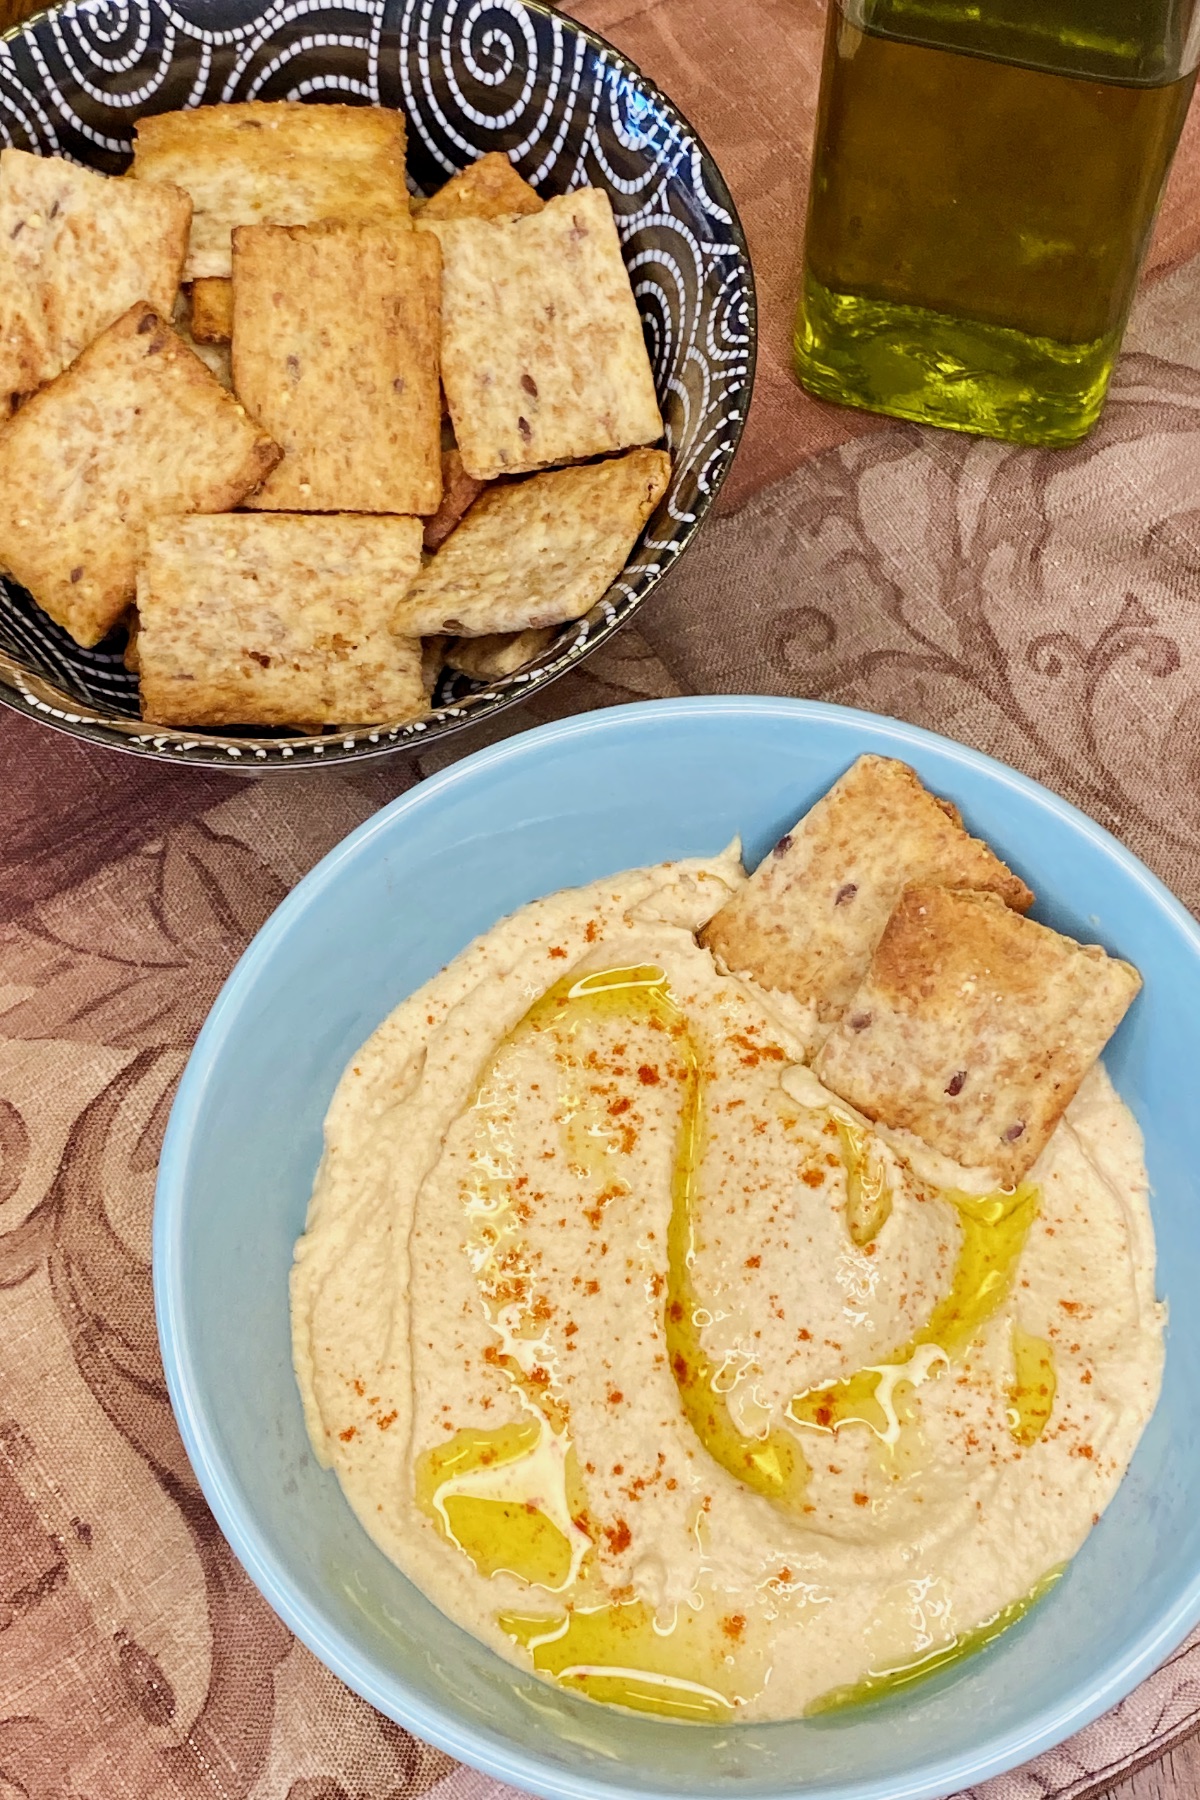 This hummus version skips the harissa topping and is simply served with a drizzle of extra virgin olive oil and a sprinkling of sweet paprika. Here, we're serving the hummus with pita crackers.